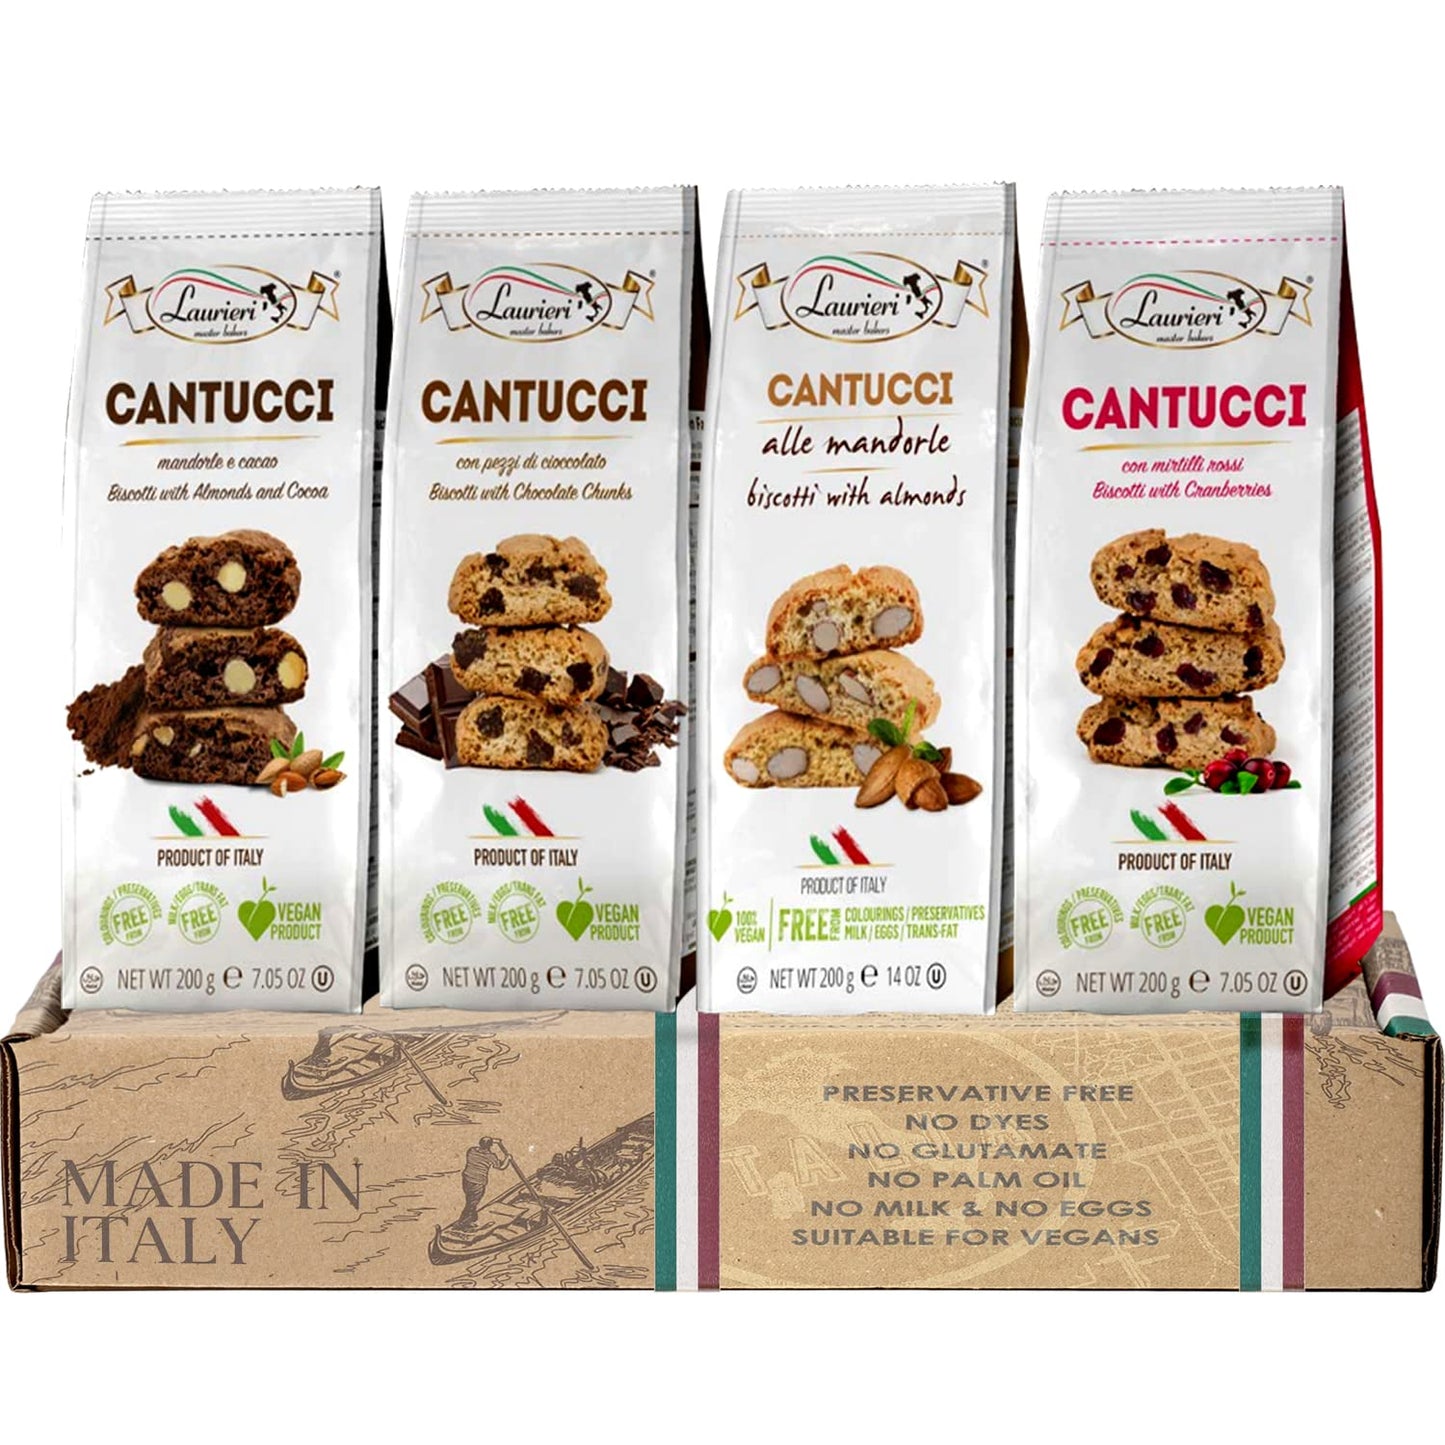 Biscotti Italian Cookies - Variety Pack Of 4 - Food Gift Box - Gourmet Cookie Gift Basket From Italy - Coffee Dipping Biscotti Cookies - Kosher